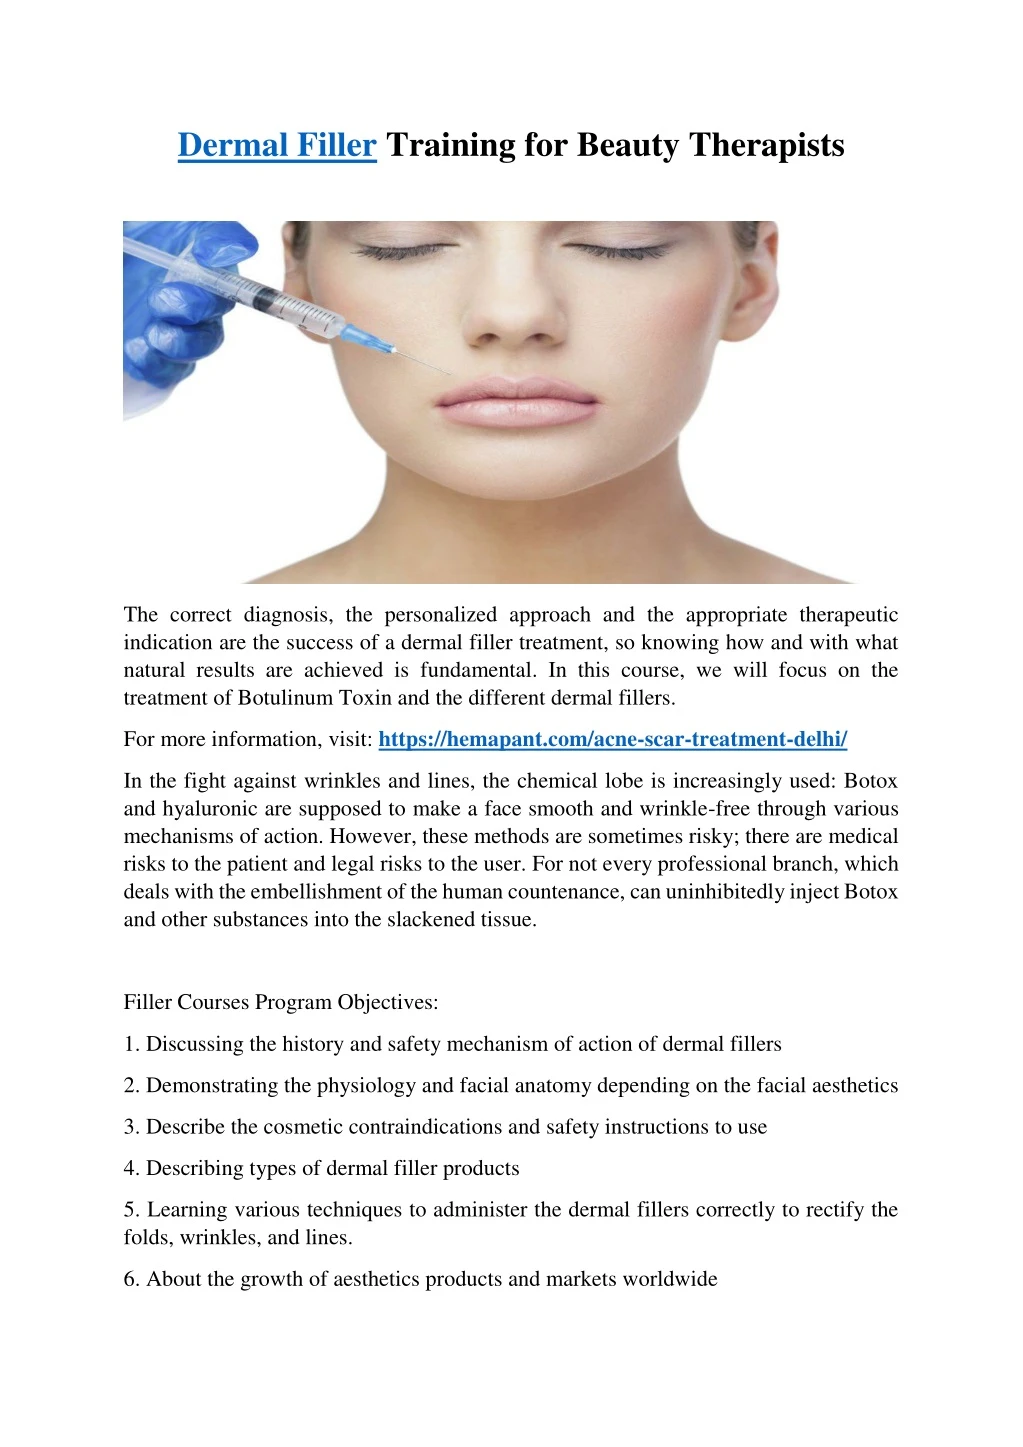 dermal filler training for beauty therapists